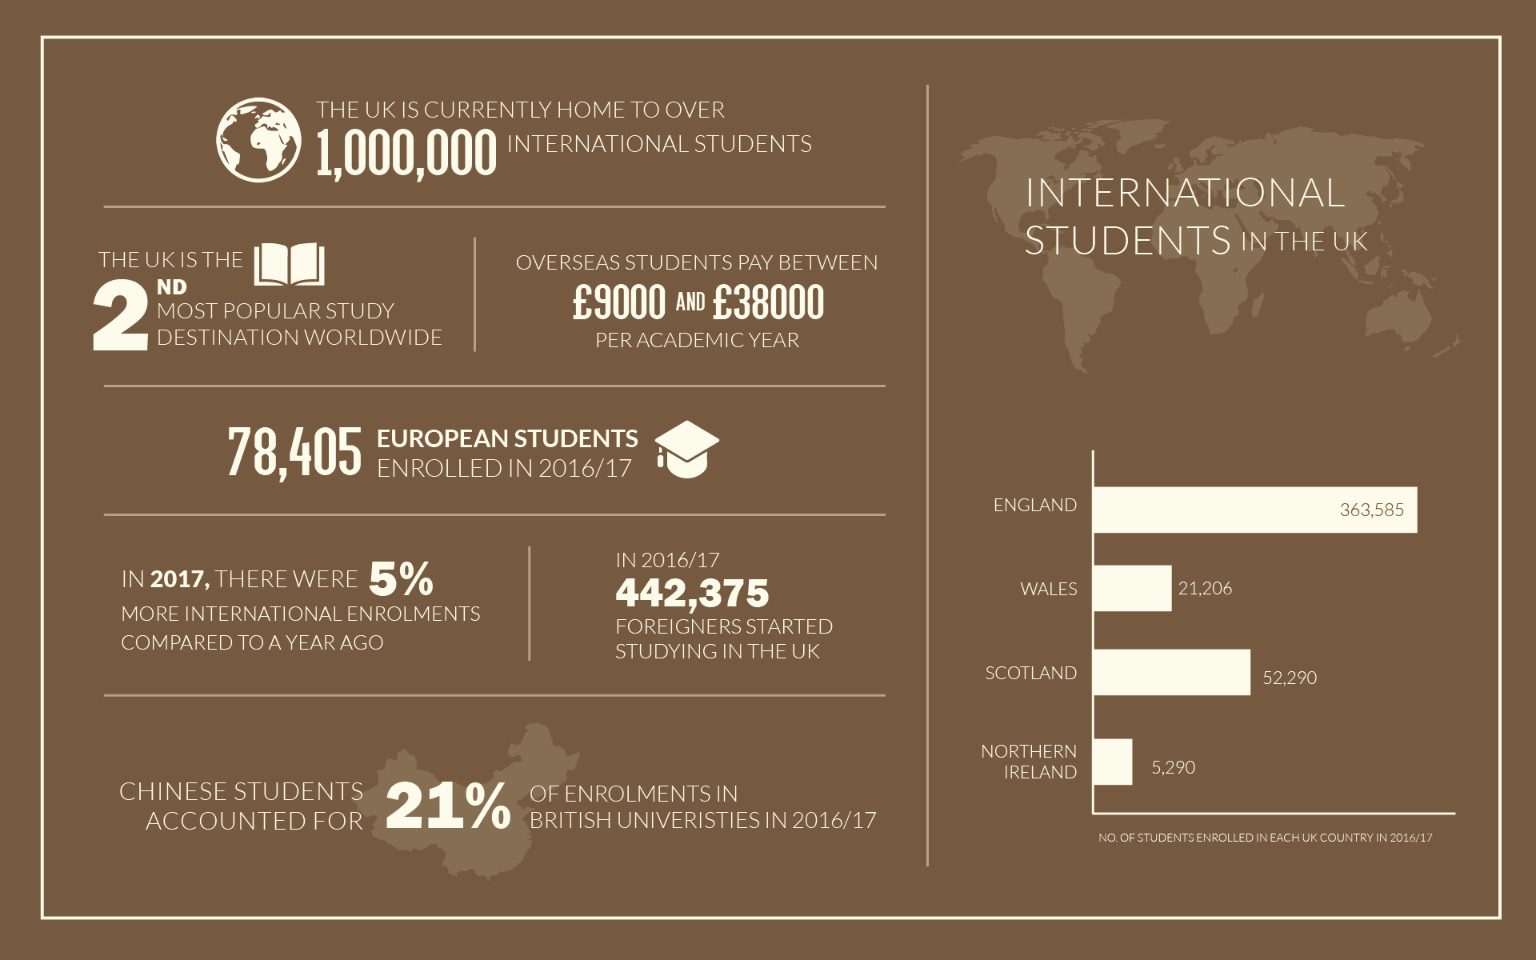 International Students in the UK infographic